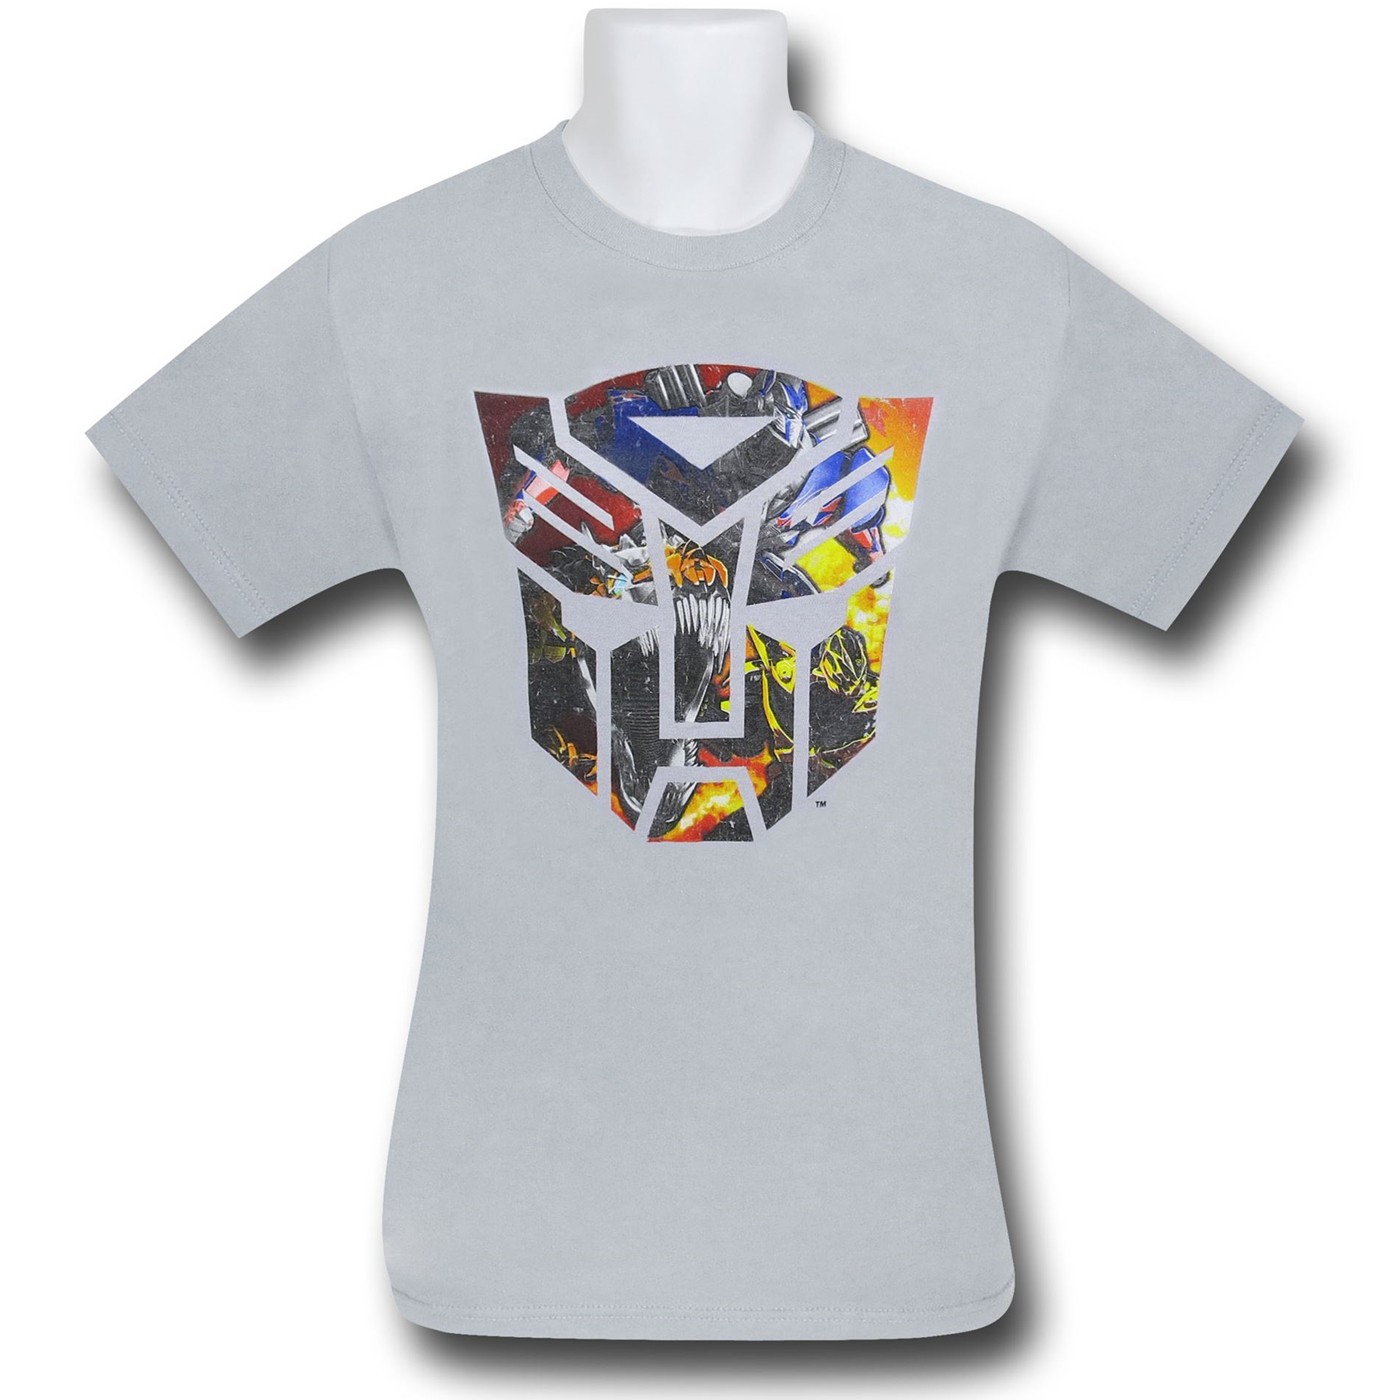 Transformers Autobot Images in Symbol T-Shirt